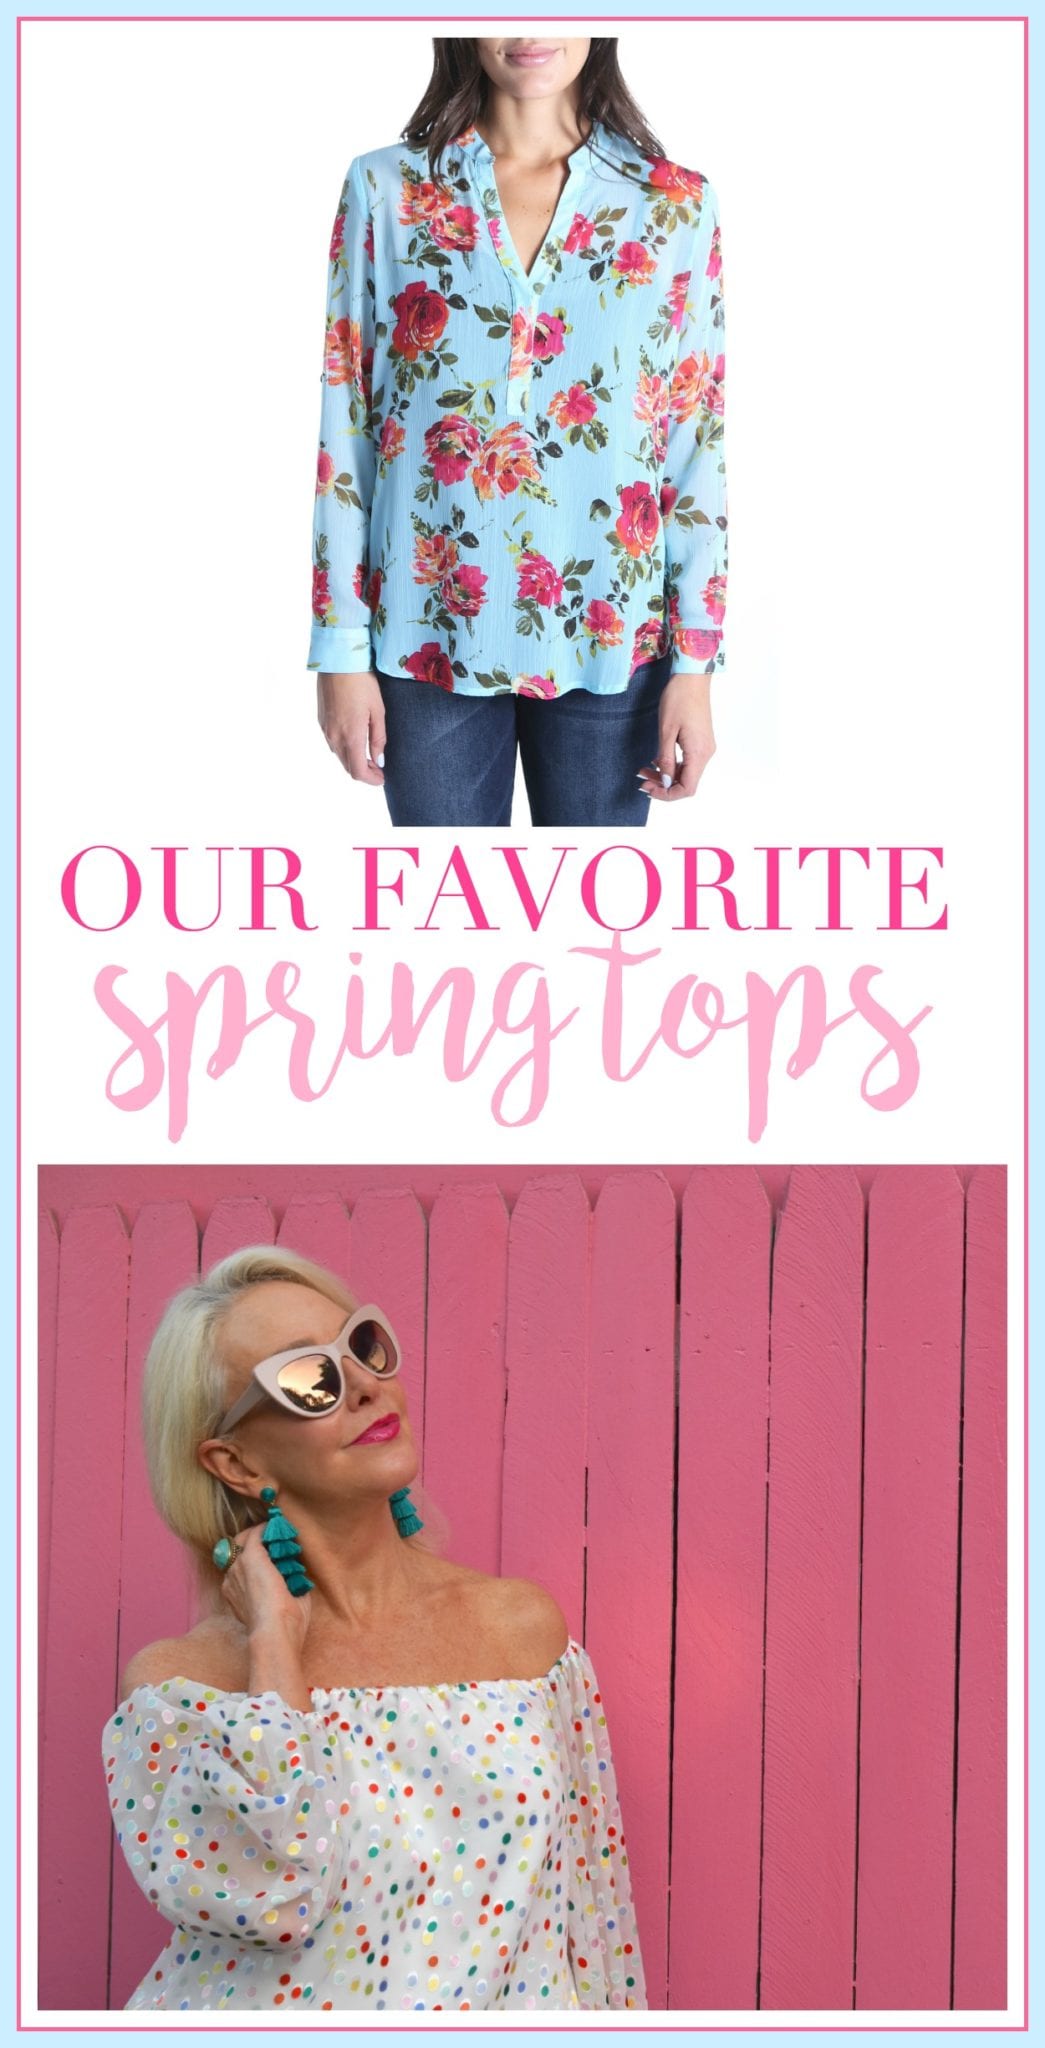 spring tops, our favorite spring tops, best spring tops, best shirts for springs, spring outfits, spring outfit inspiration